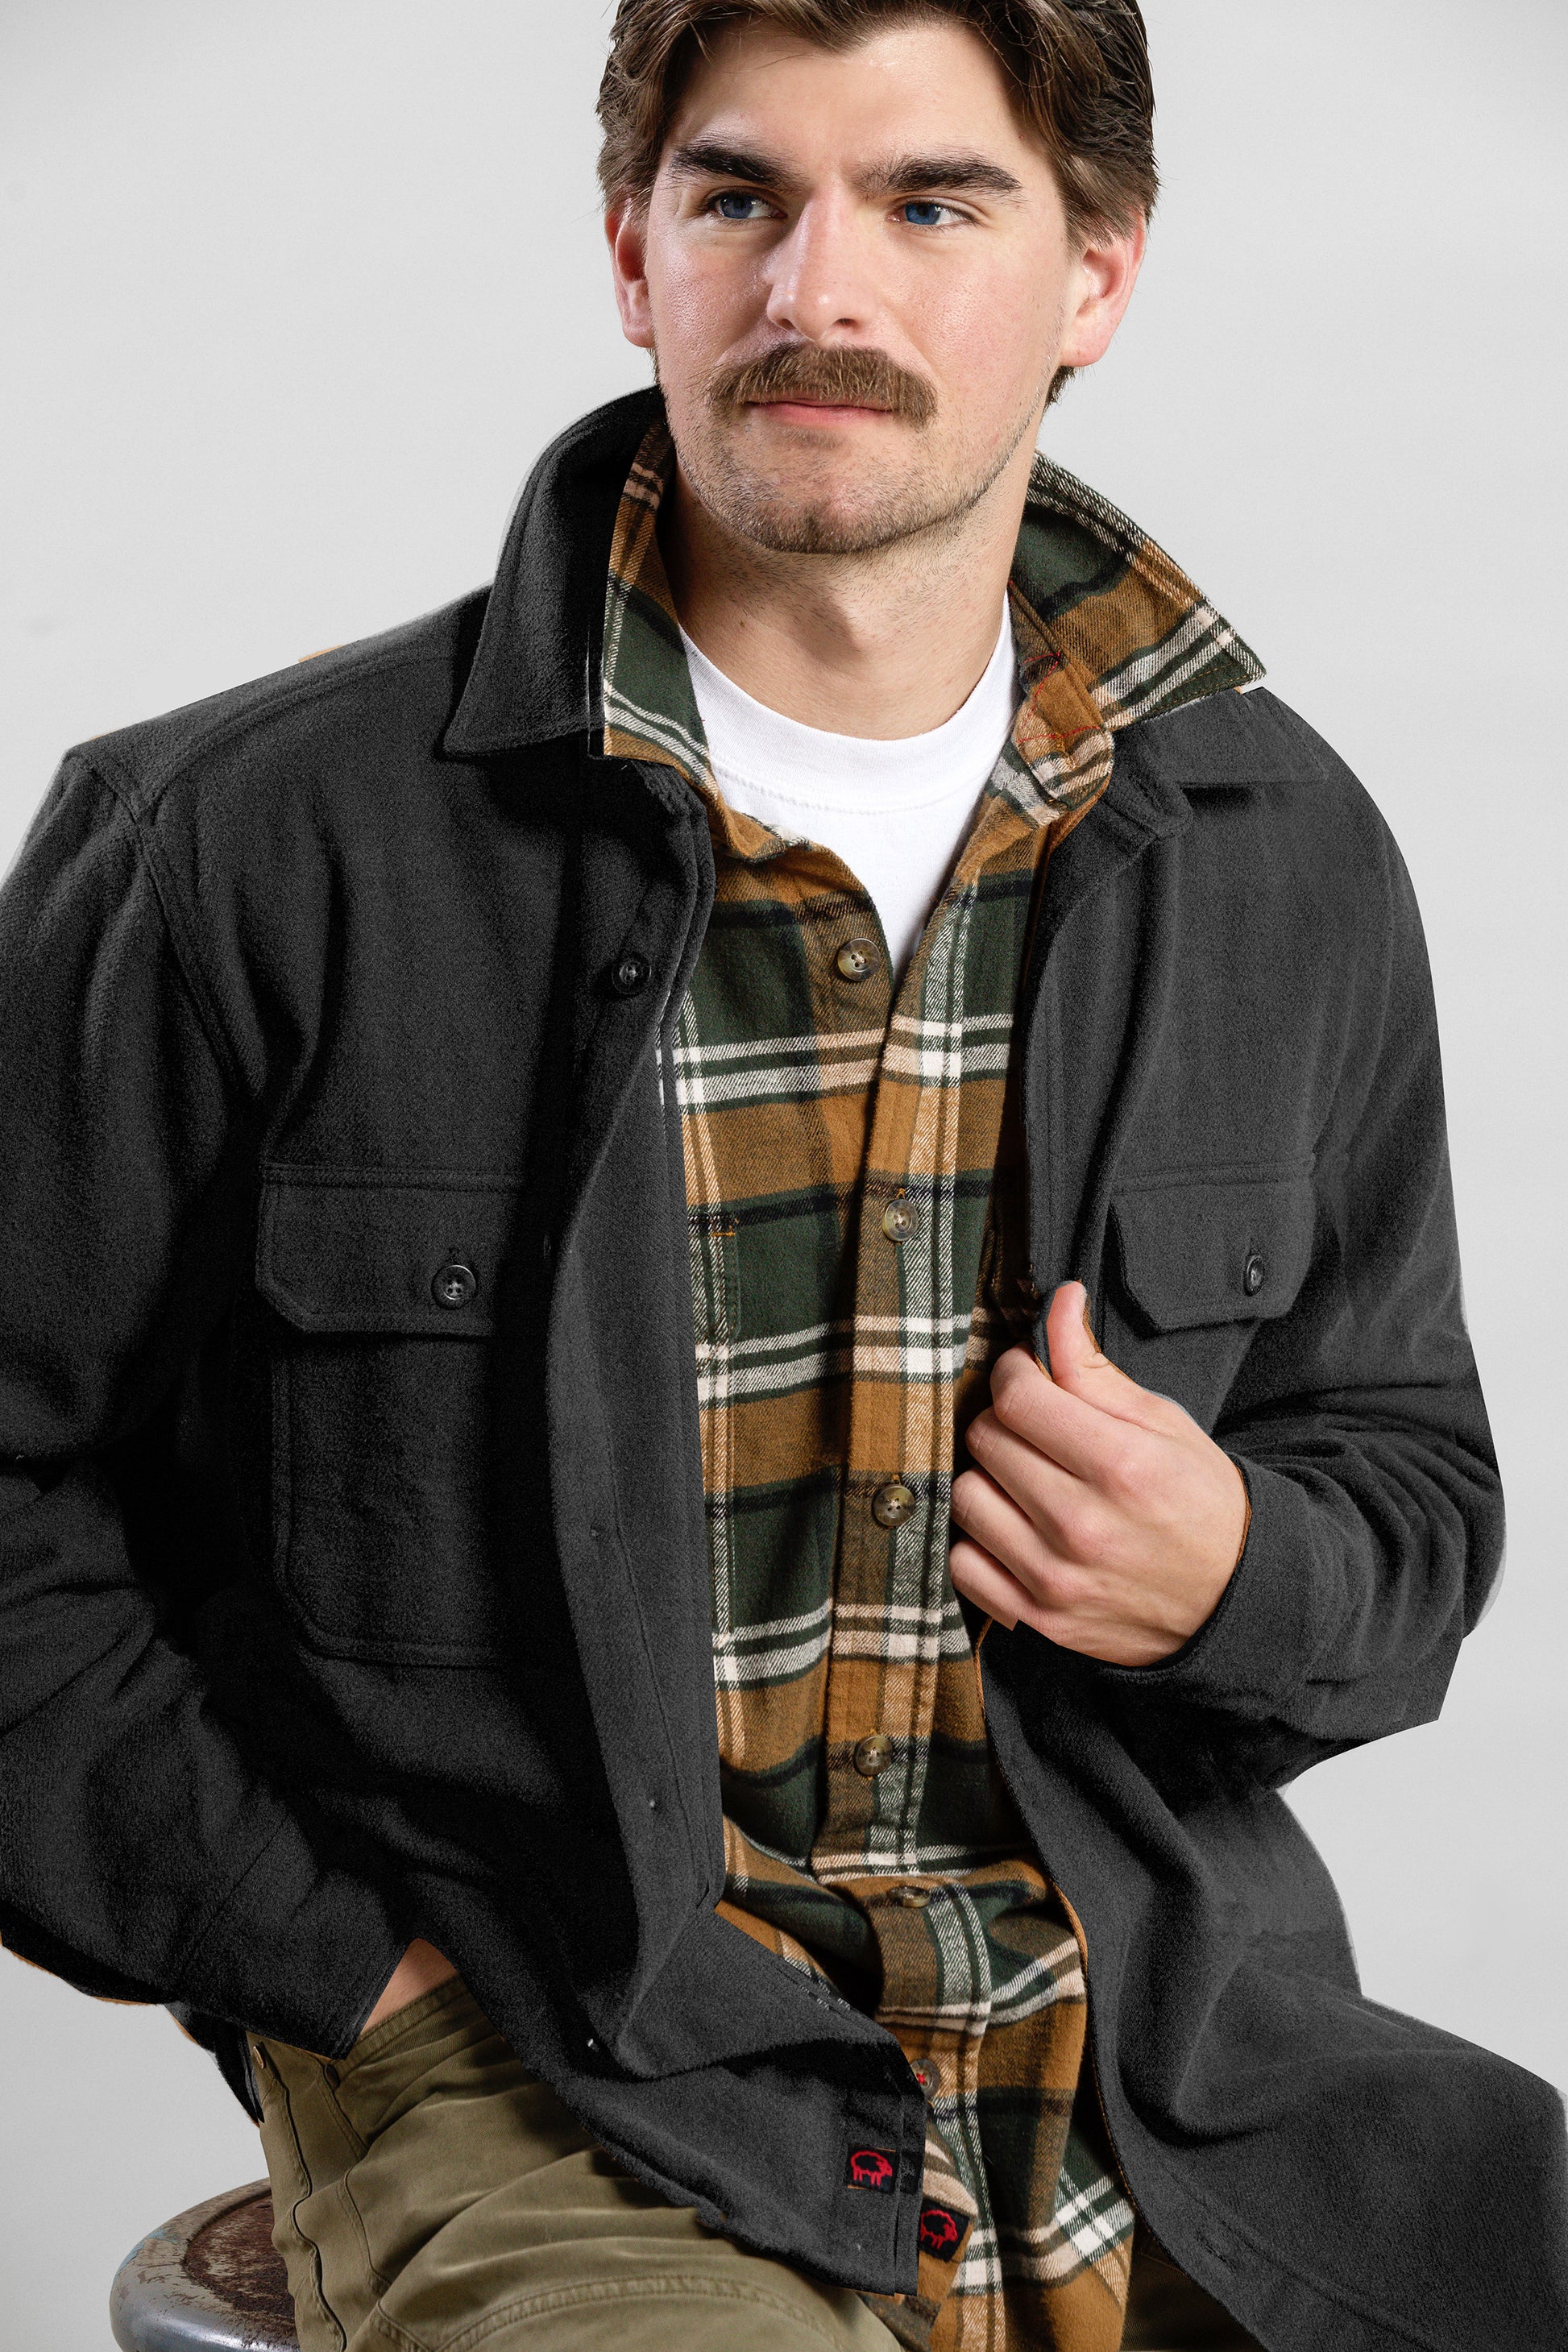 Men's Solid Flannel Shirt - 9 OZ Woolly Dry Goods